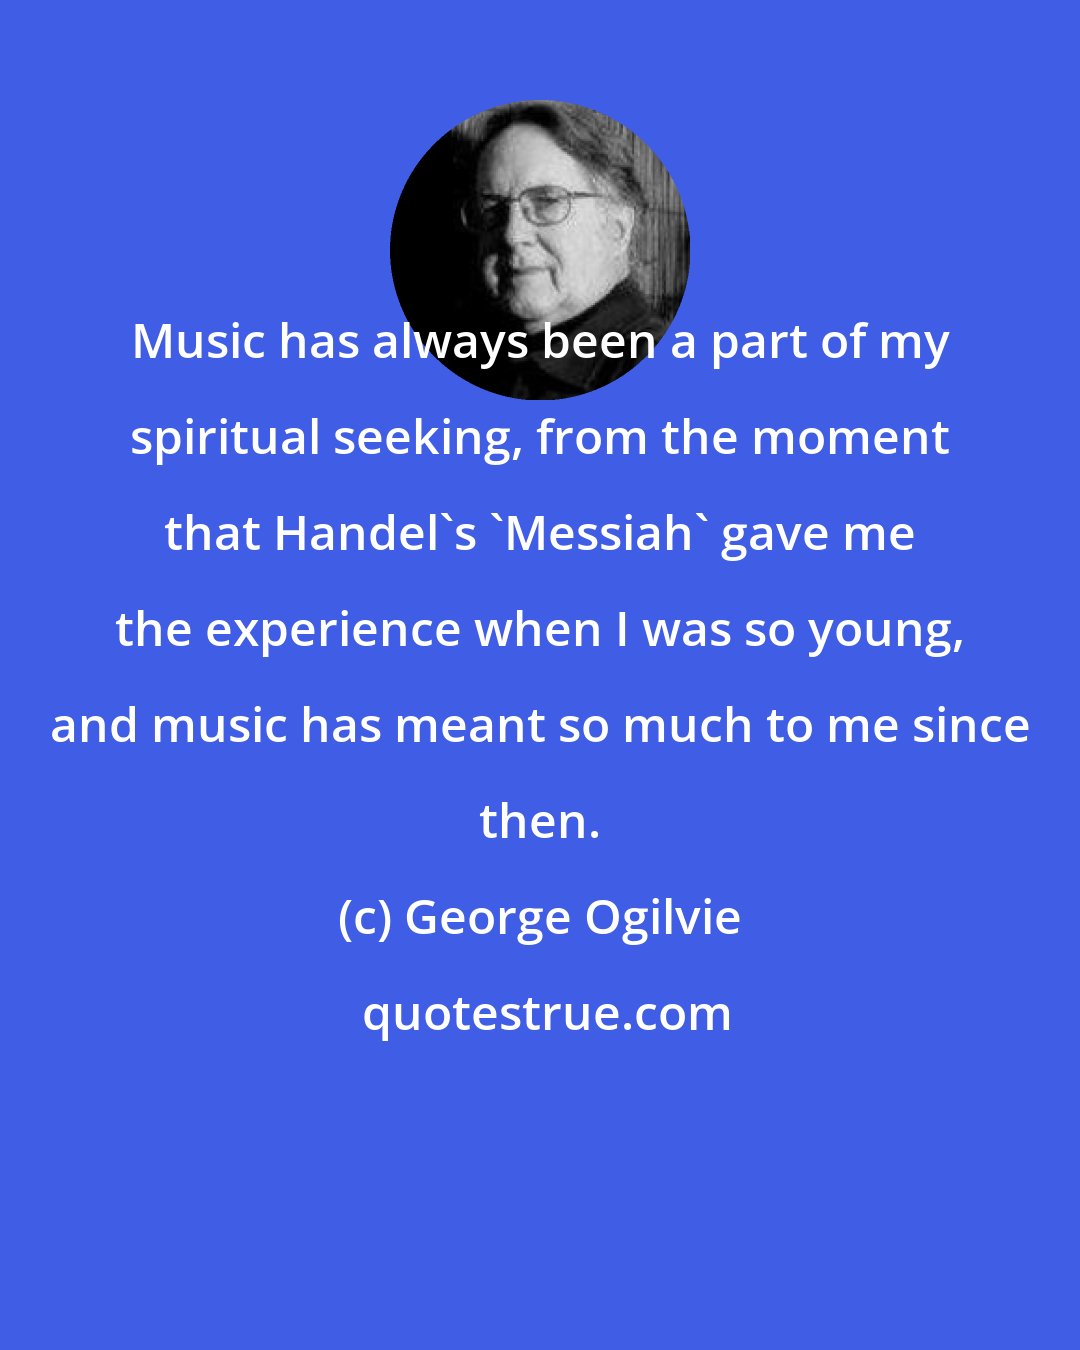 George Ogilvie: Music has always been a part of my spiritual seeking, from the moment that Handel's 'Messiah' gave me the experience when I was so young, and music has meant so much to me since then.